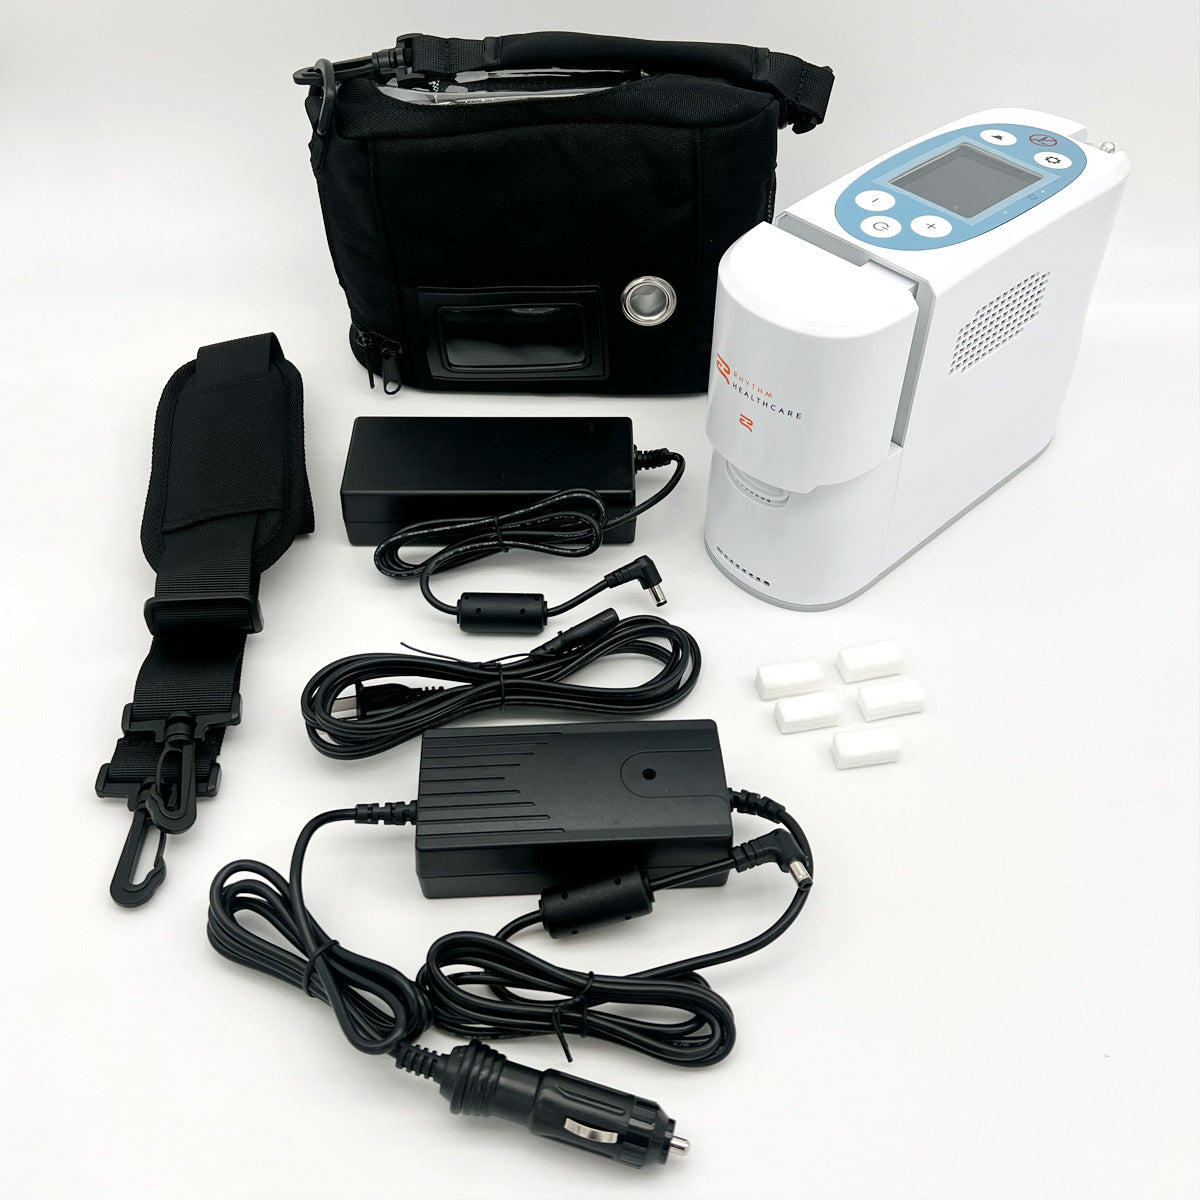 Rhythm P2-E6 Portable Oxygen Concentrator Package - CERTIFIED PRE-OWNED